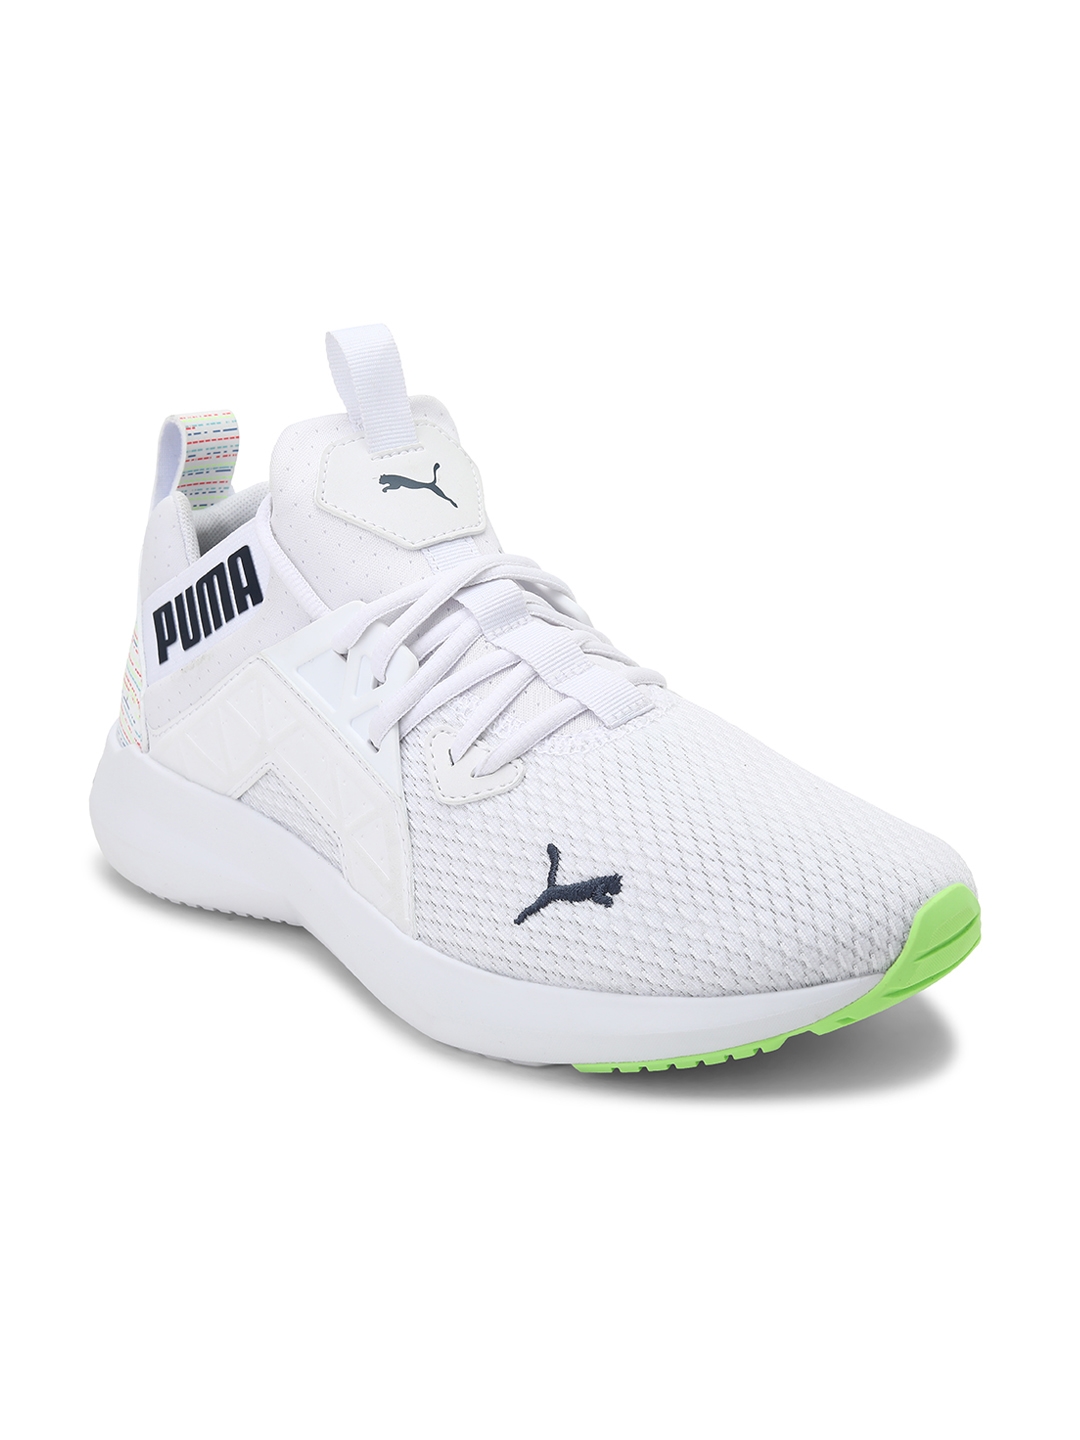 Puma | SOFTRIDE Enzo NXT Spectra Unisex Sneakers 0